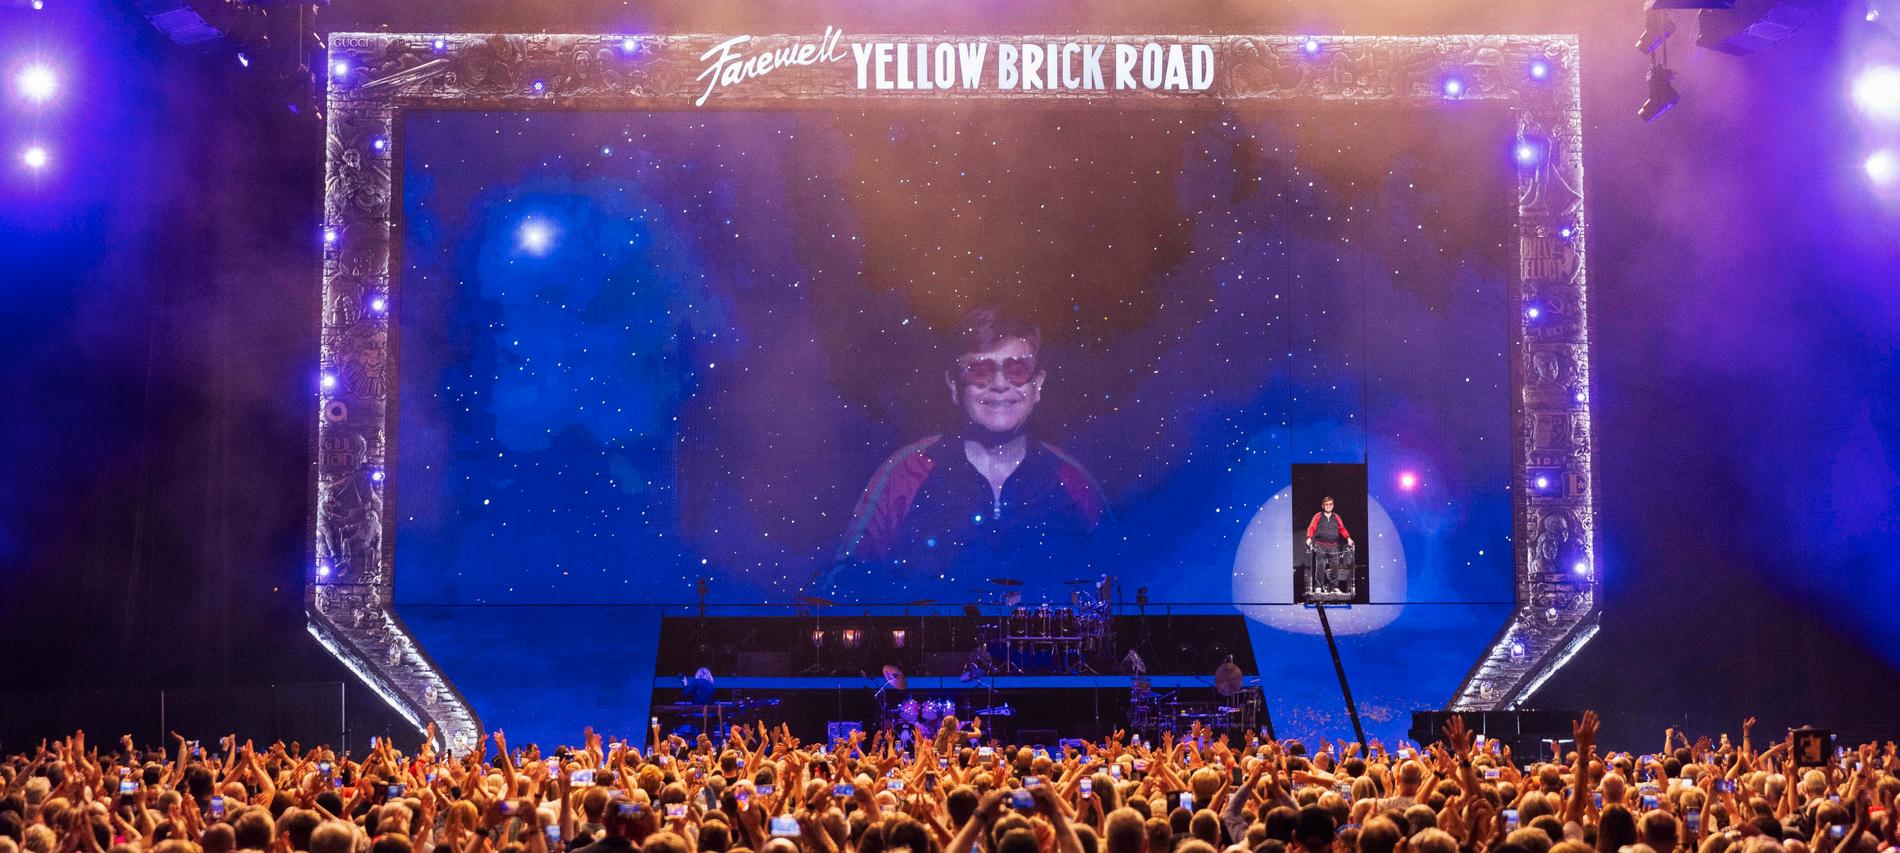 “Fearwell Yellow Brick Road” ends here at the Tele2 Arena in Stockholm